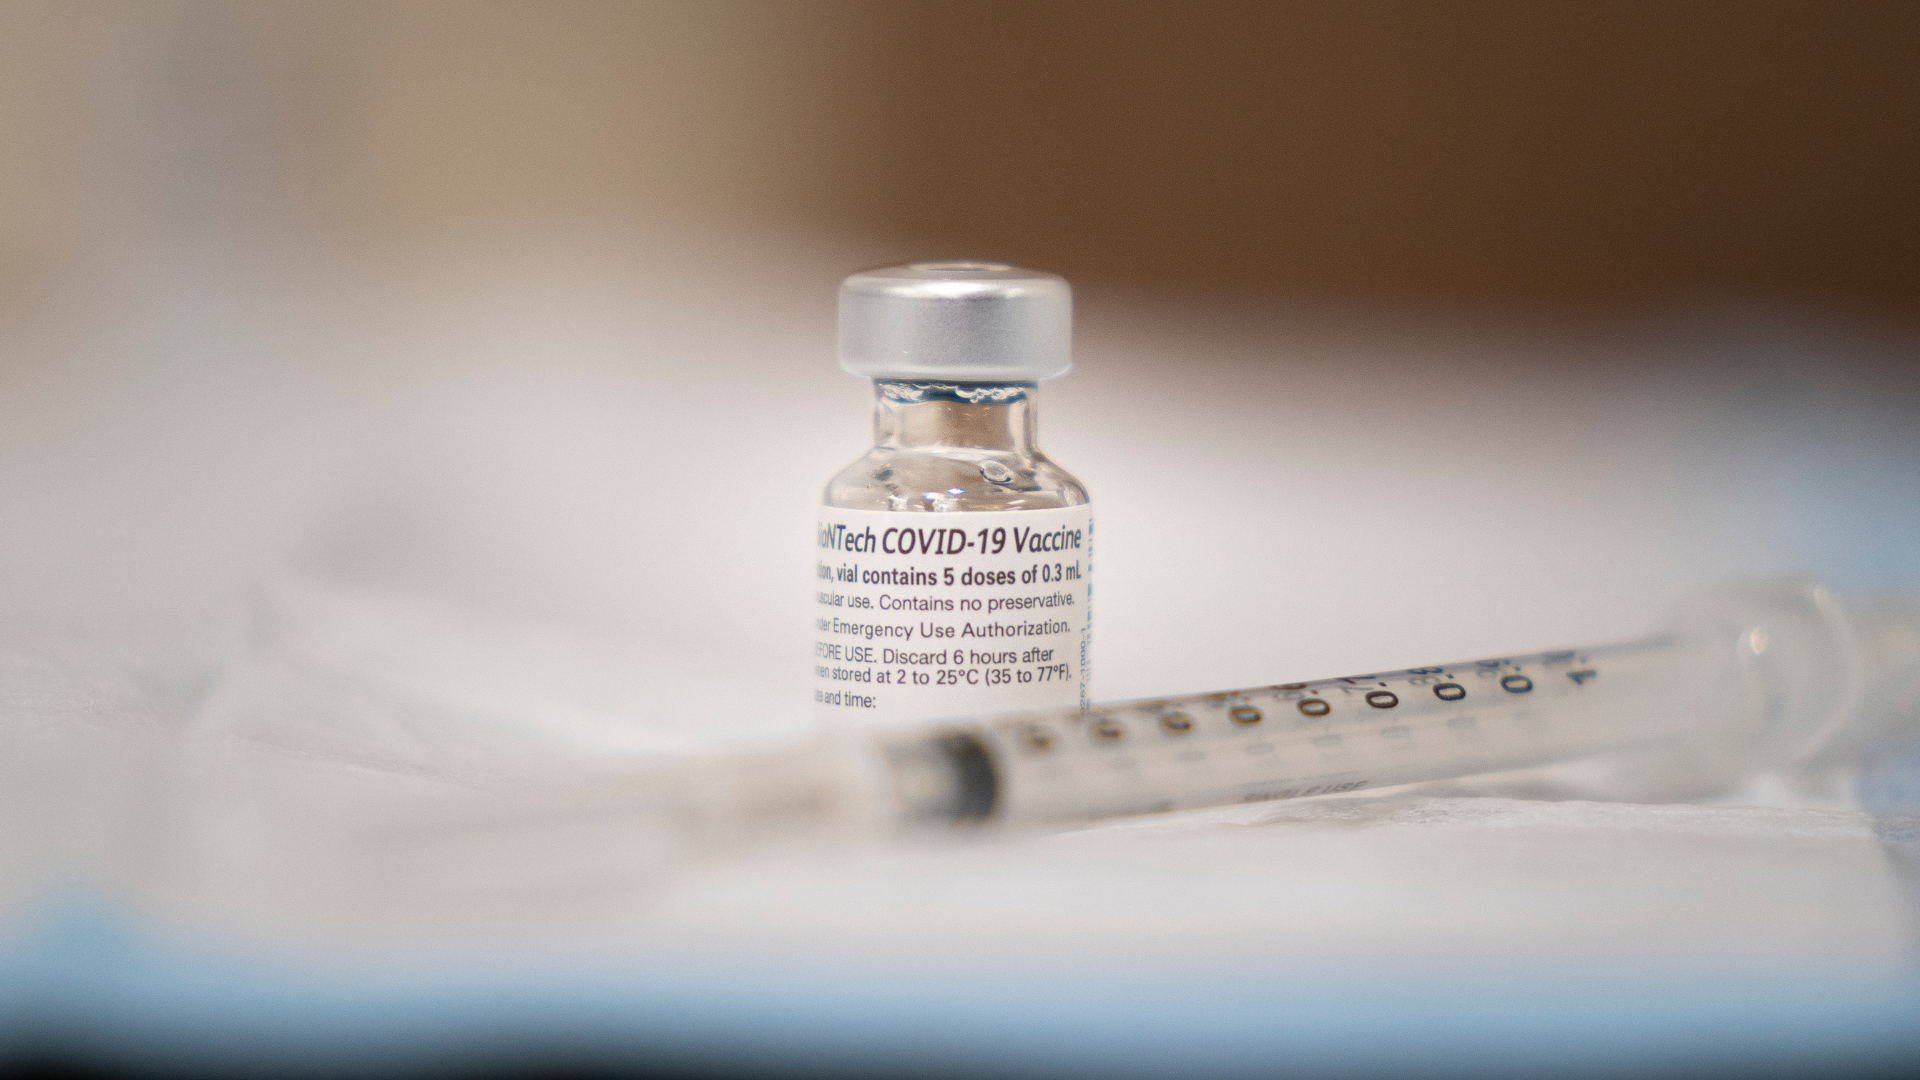 The Covid vaccine is being rolled out for more people affected by homelessness. Image credit: The Joint Staff / Flickr